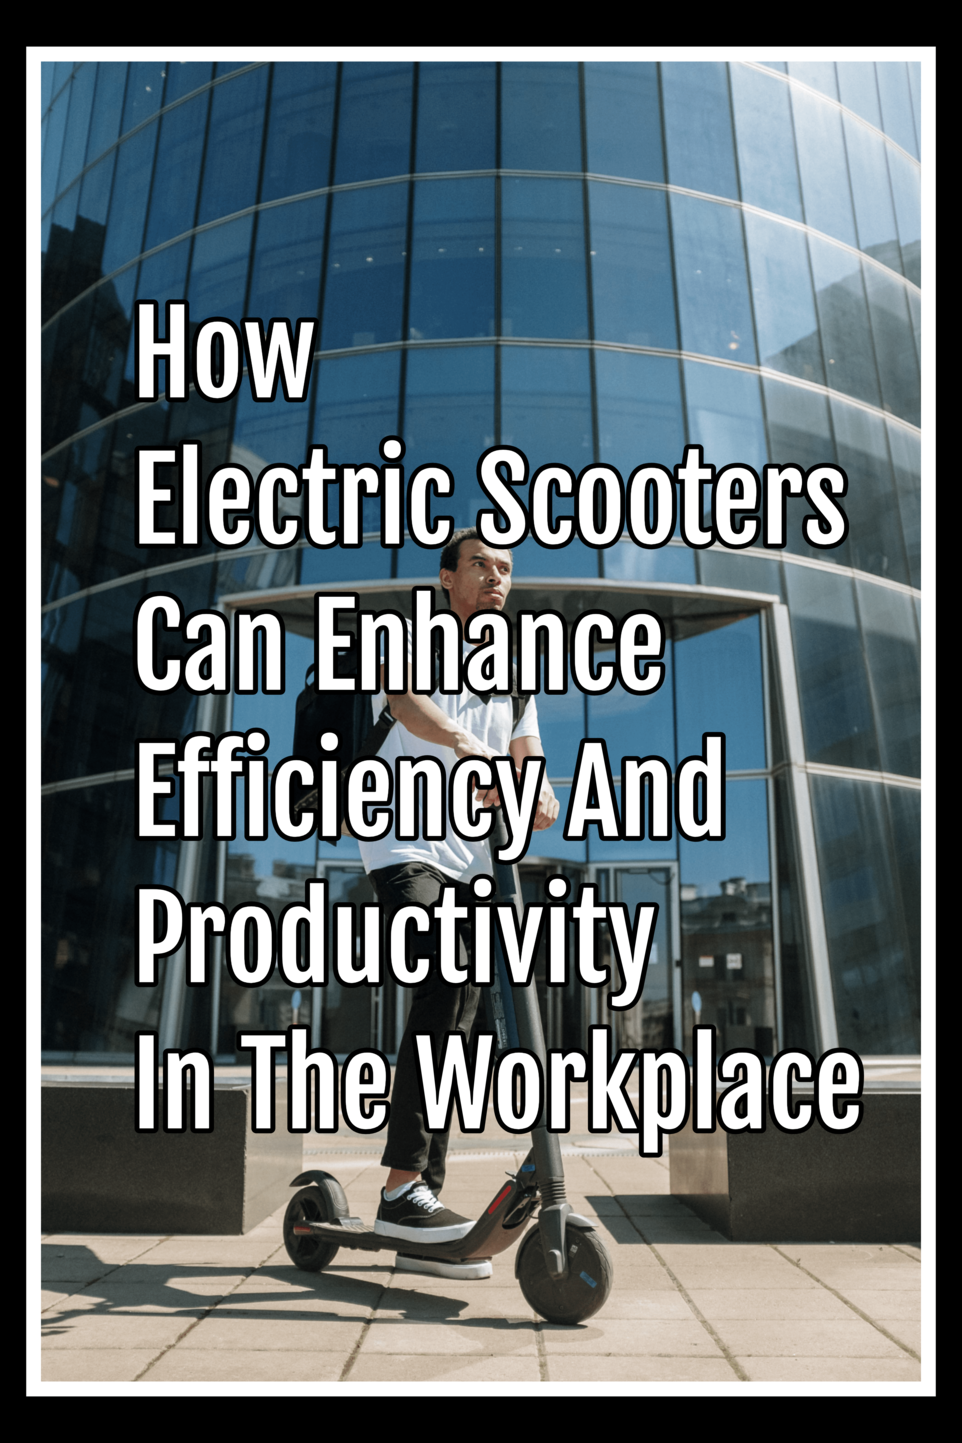 How Electric Scooters Can Enhance Efficiency And Productivity In The Workplace